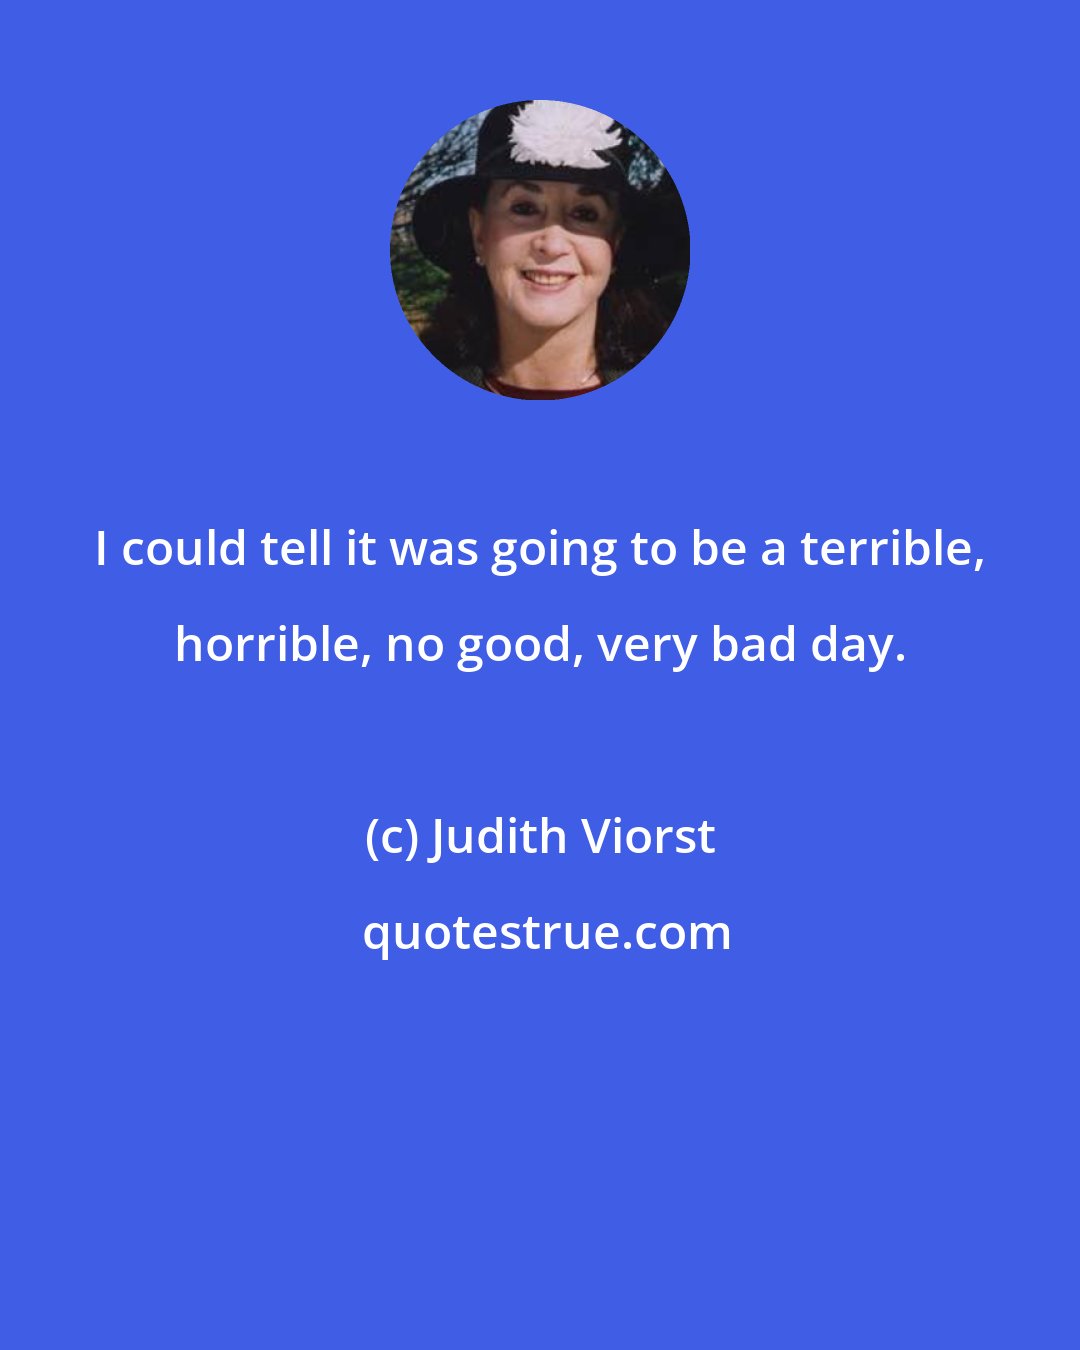 Judith Viorst: I could tell it was going to be a terrible, horrible, no good, very bad day.